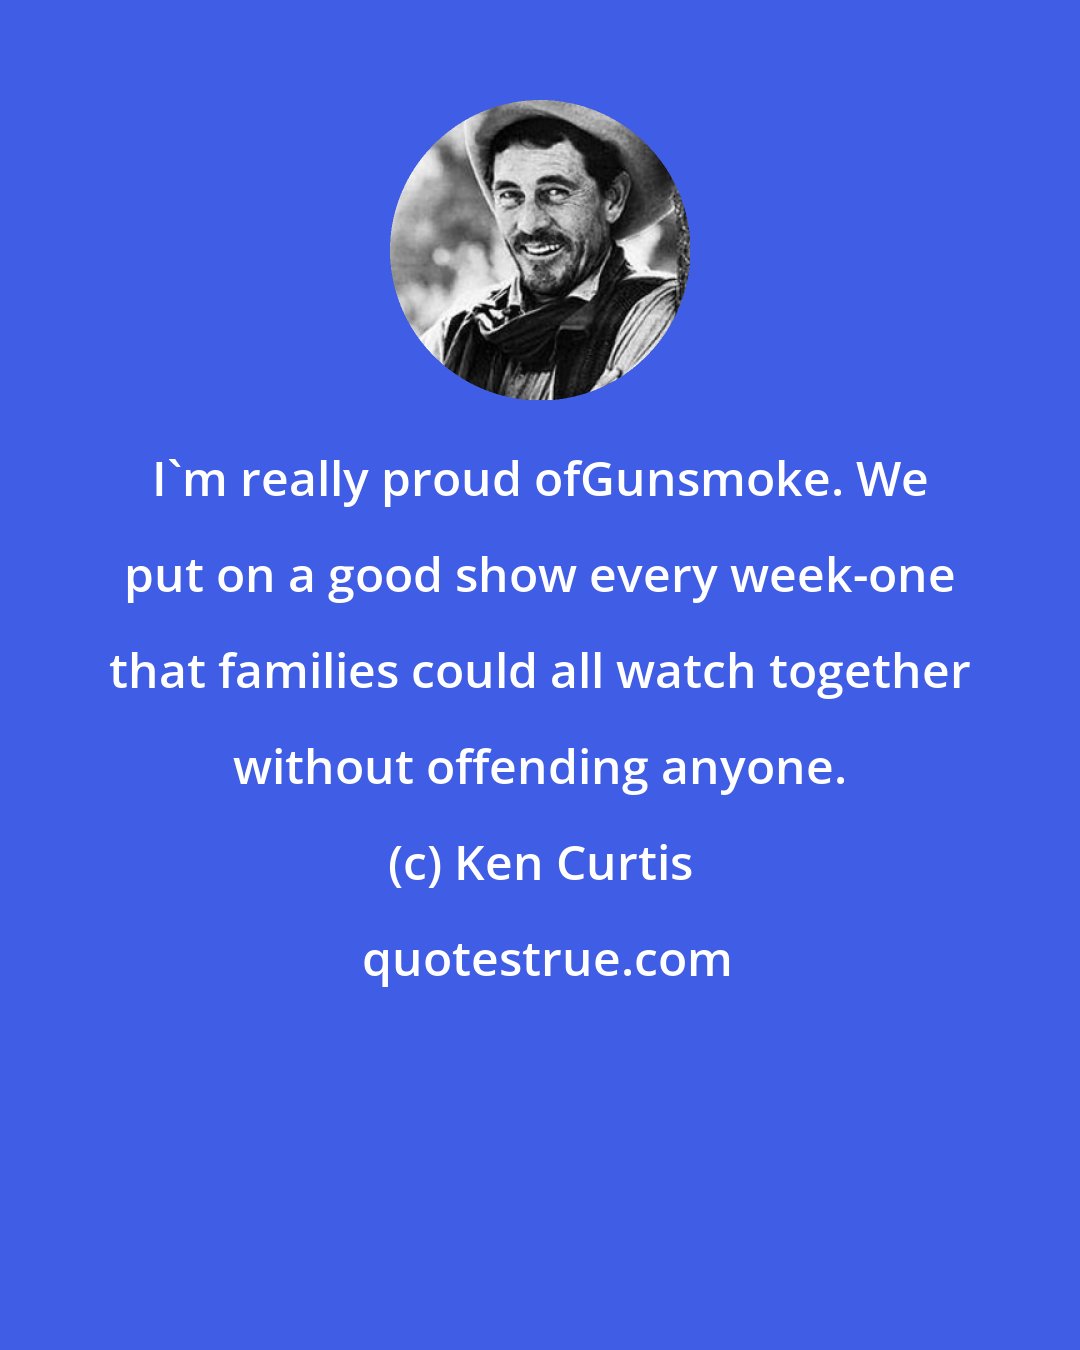 Ken Curtis: I'm really proud ofGunsmoke. We put on a good show every week-one that families could all watch together without offending anyone.